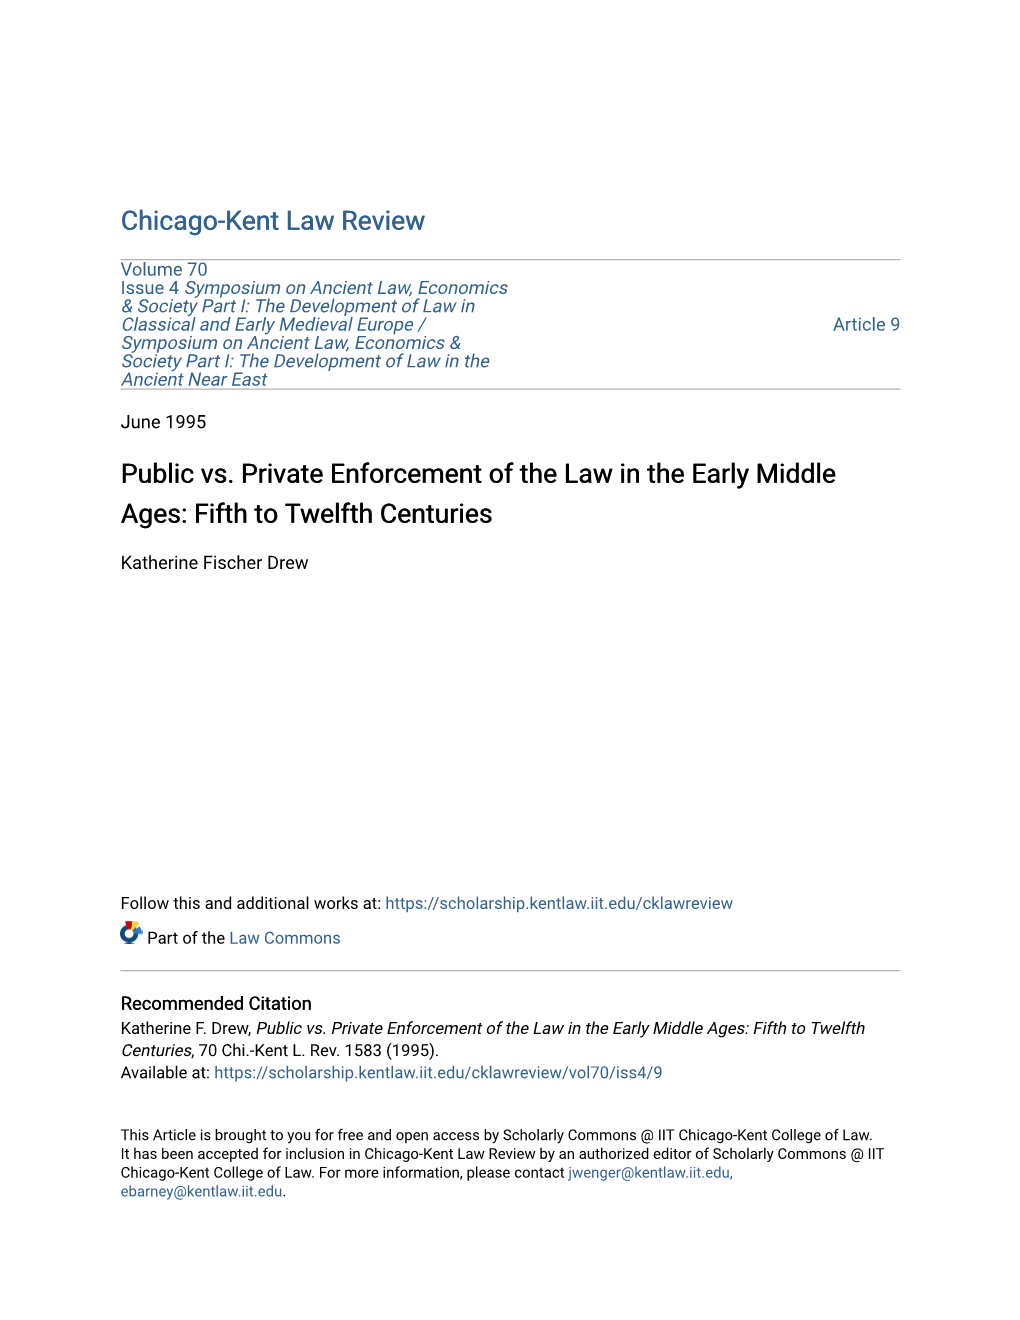 Public Vs. Private Enforcement of the Law in the Early Middle Ages: Fifth to Twelfth Centuries